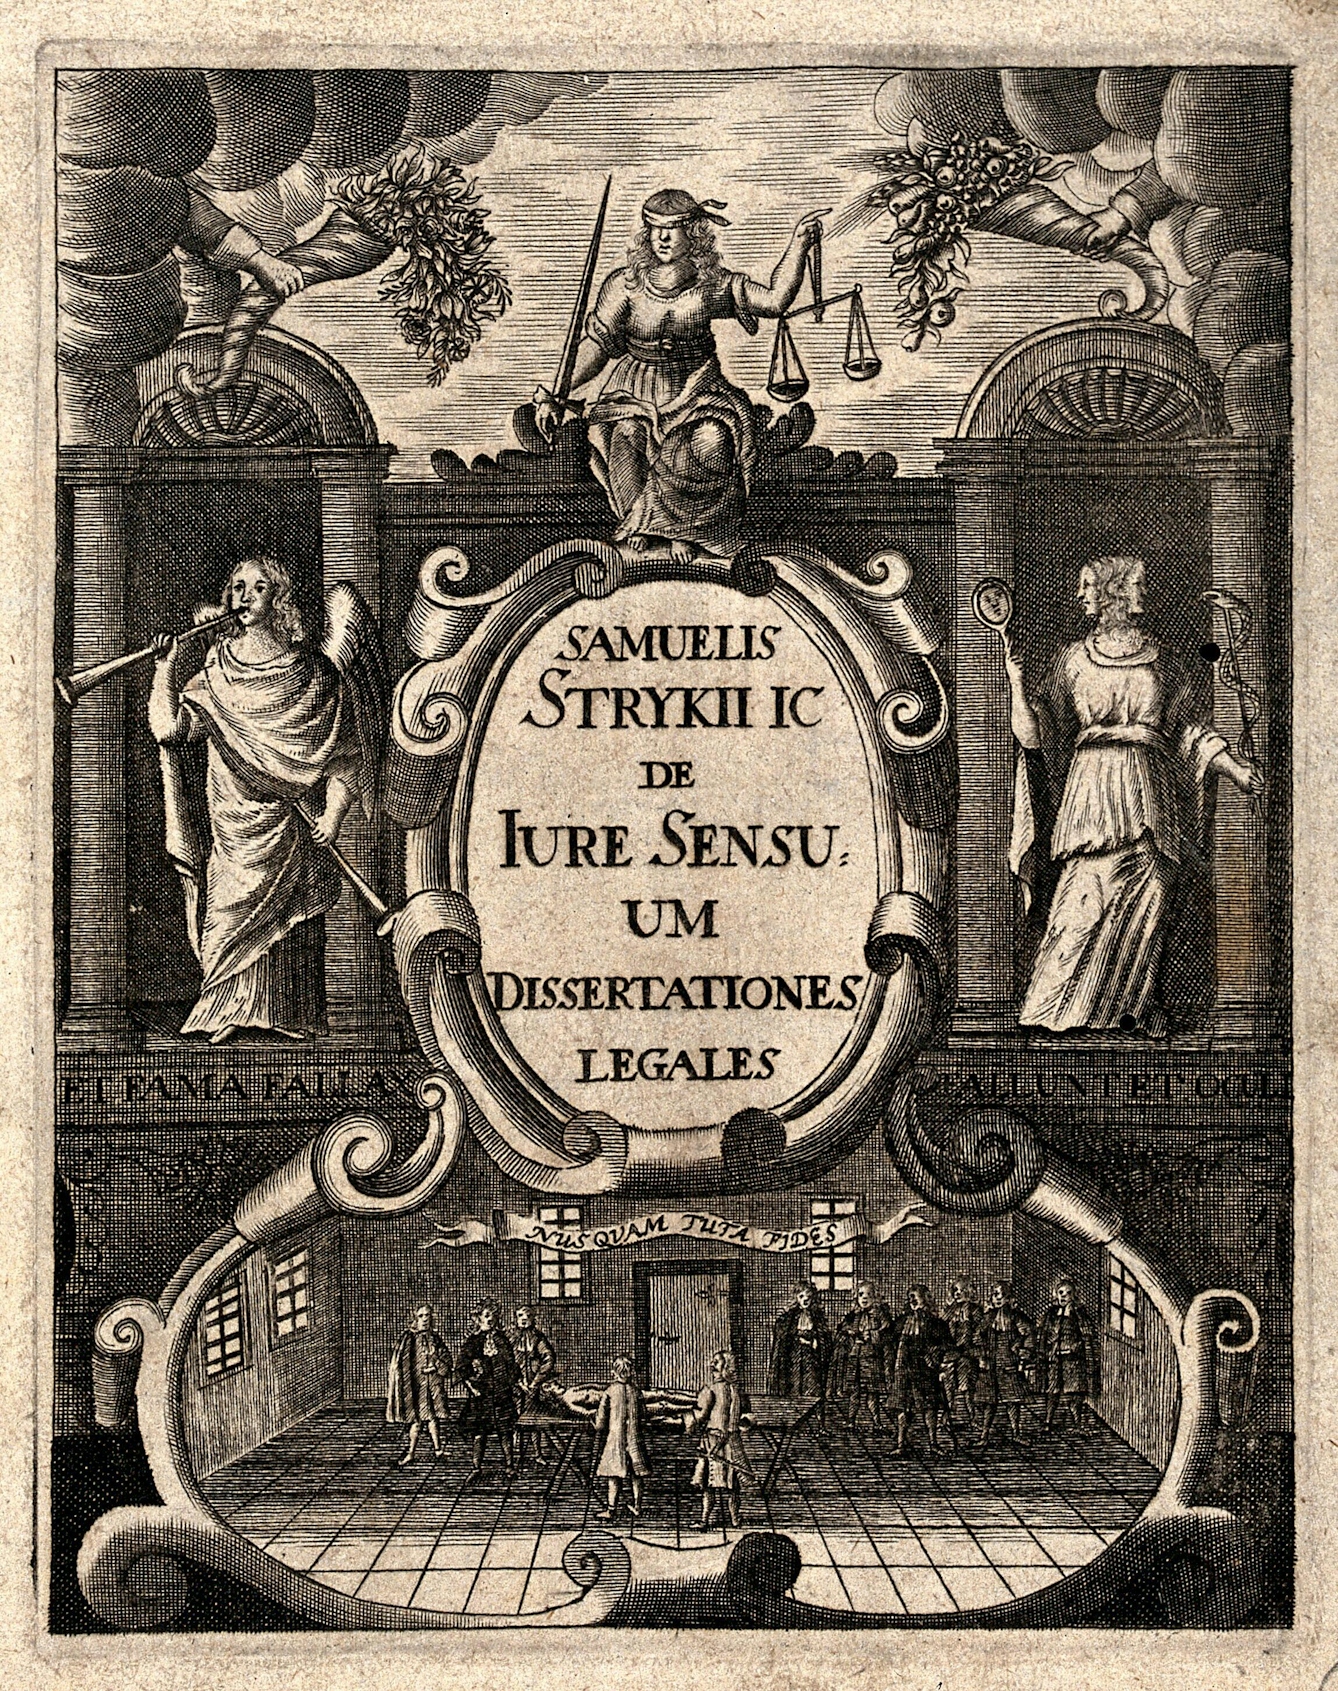 A black and white engraving showing a scene with an allegorical depiction of justice at the top, with her sword and scales. To the left, a figure representing fame blows a trumpet, and to the right, a two-faced woman is shown in classical-style robes representing deceit. Below, doctors are shown conducting an autopsy on a body, surrounded by onlookers. The plate has the lettering "Et fama fallax ... fallunt et oculi" (fame is deceptive ... and the eyes also deceive). The autopsy scene bears the lettering "Nusquam tuta fides" (trust is nowhere safe), apparently meaning that the people attending cannot be entirely confident in the findings of the senses.